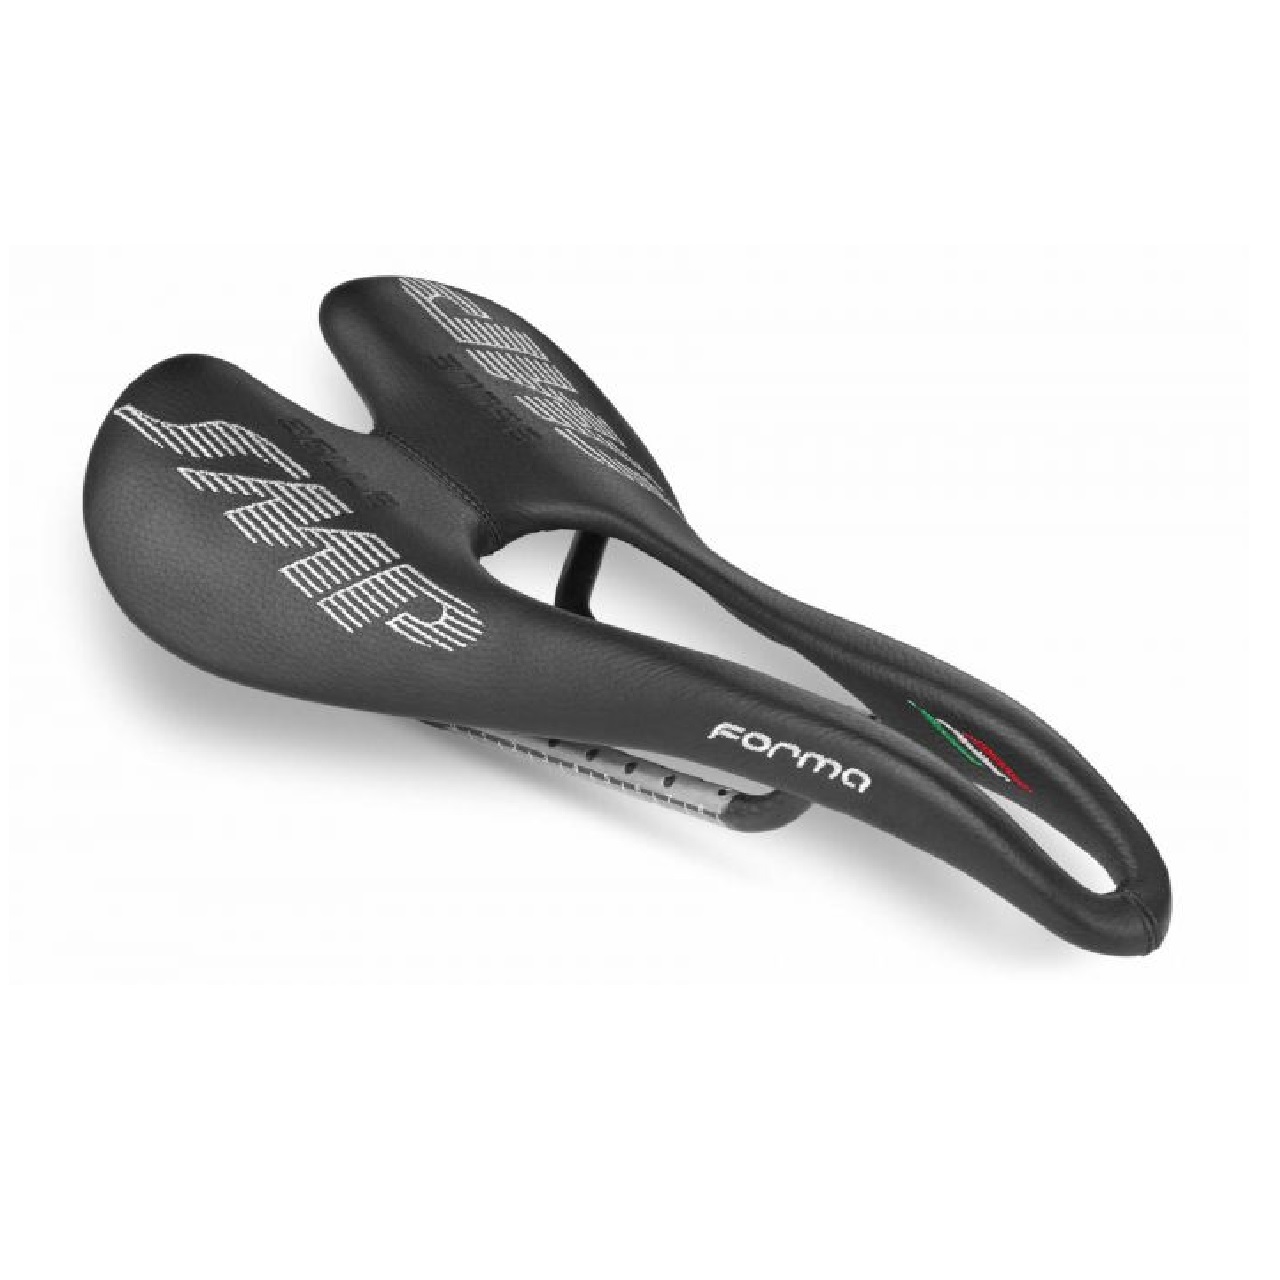 Selle SMP FORMA Bike Saddle Seat Black with Carbon Rails